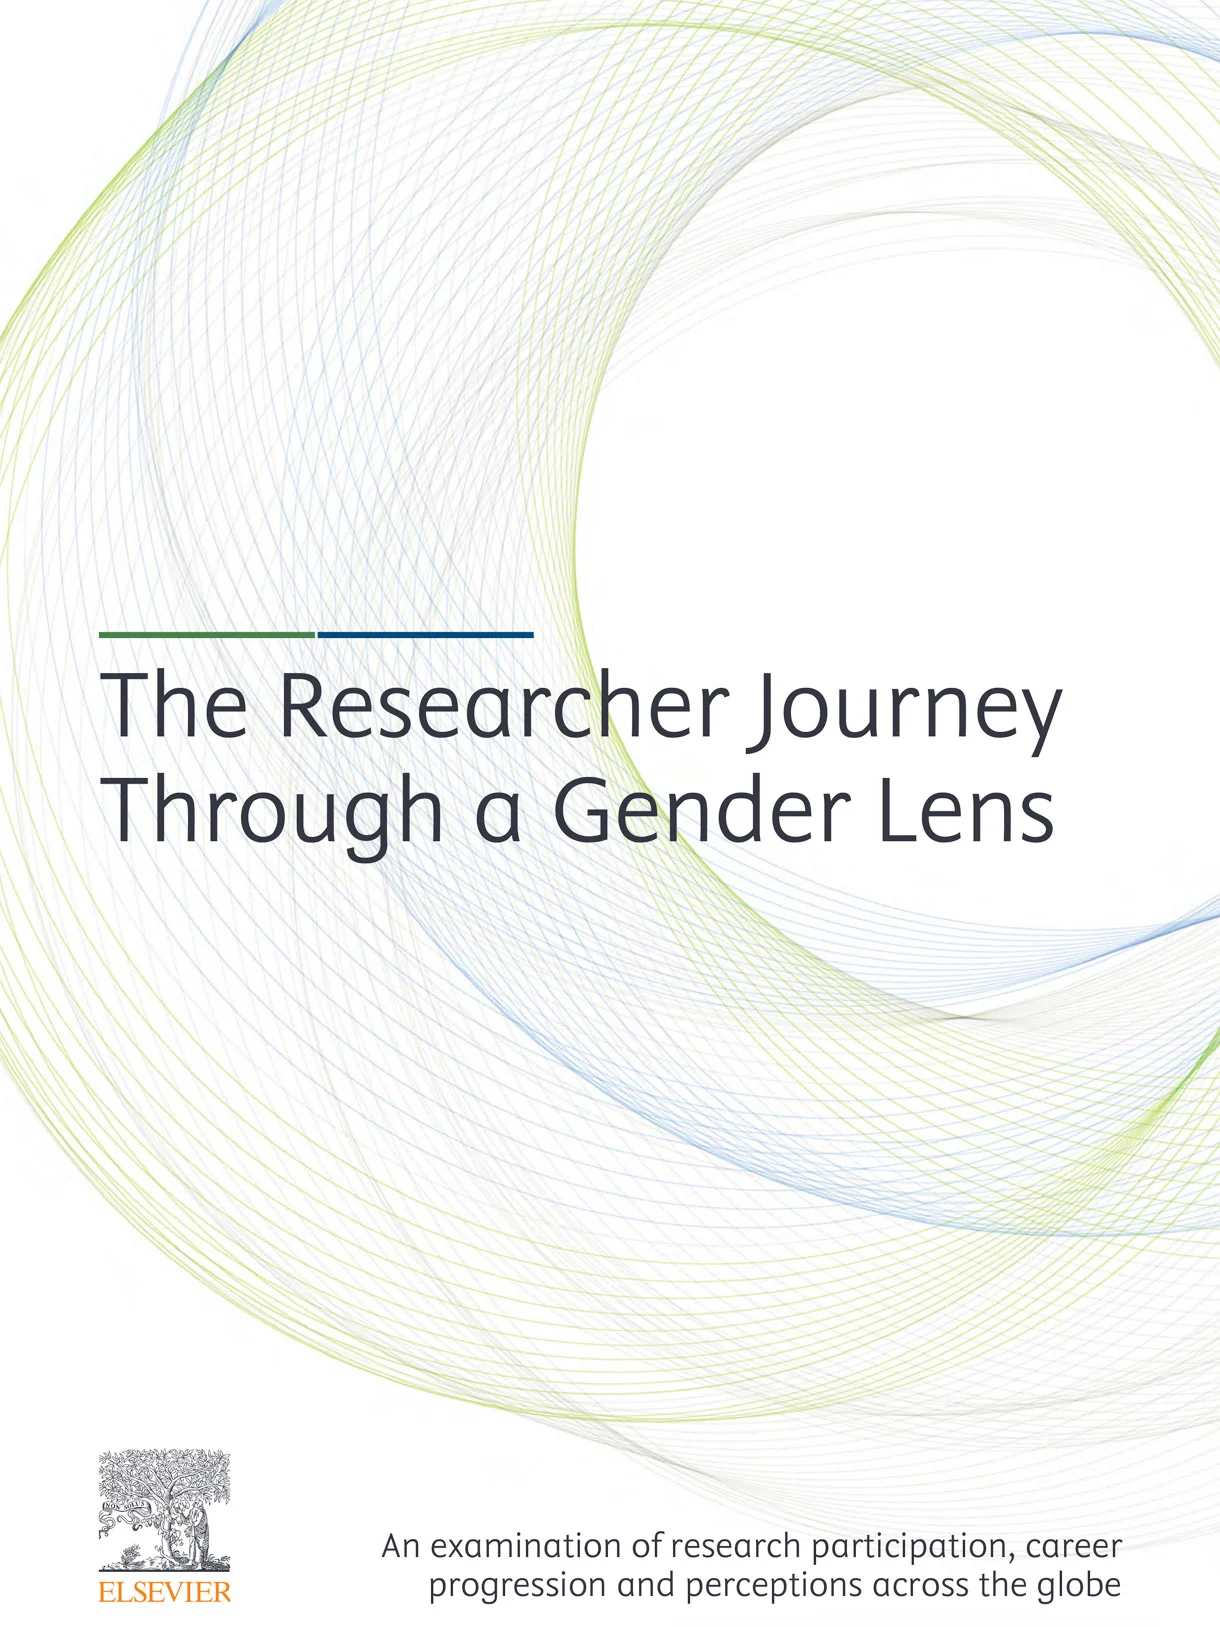 Cover of the report "The Researcher Journey Through a Gender Lens"